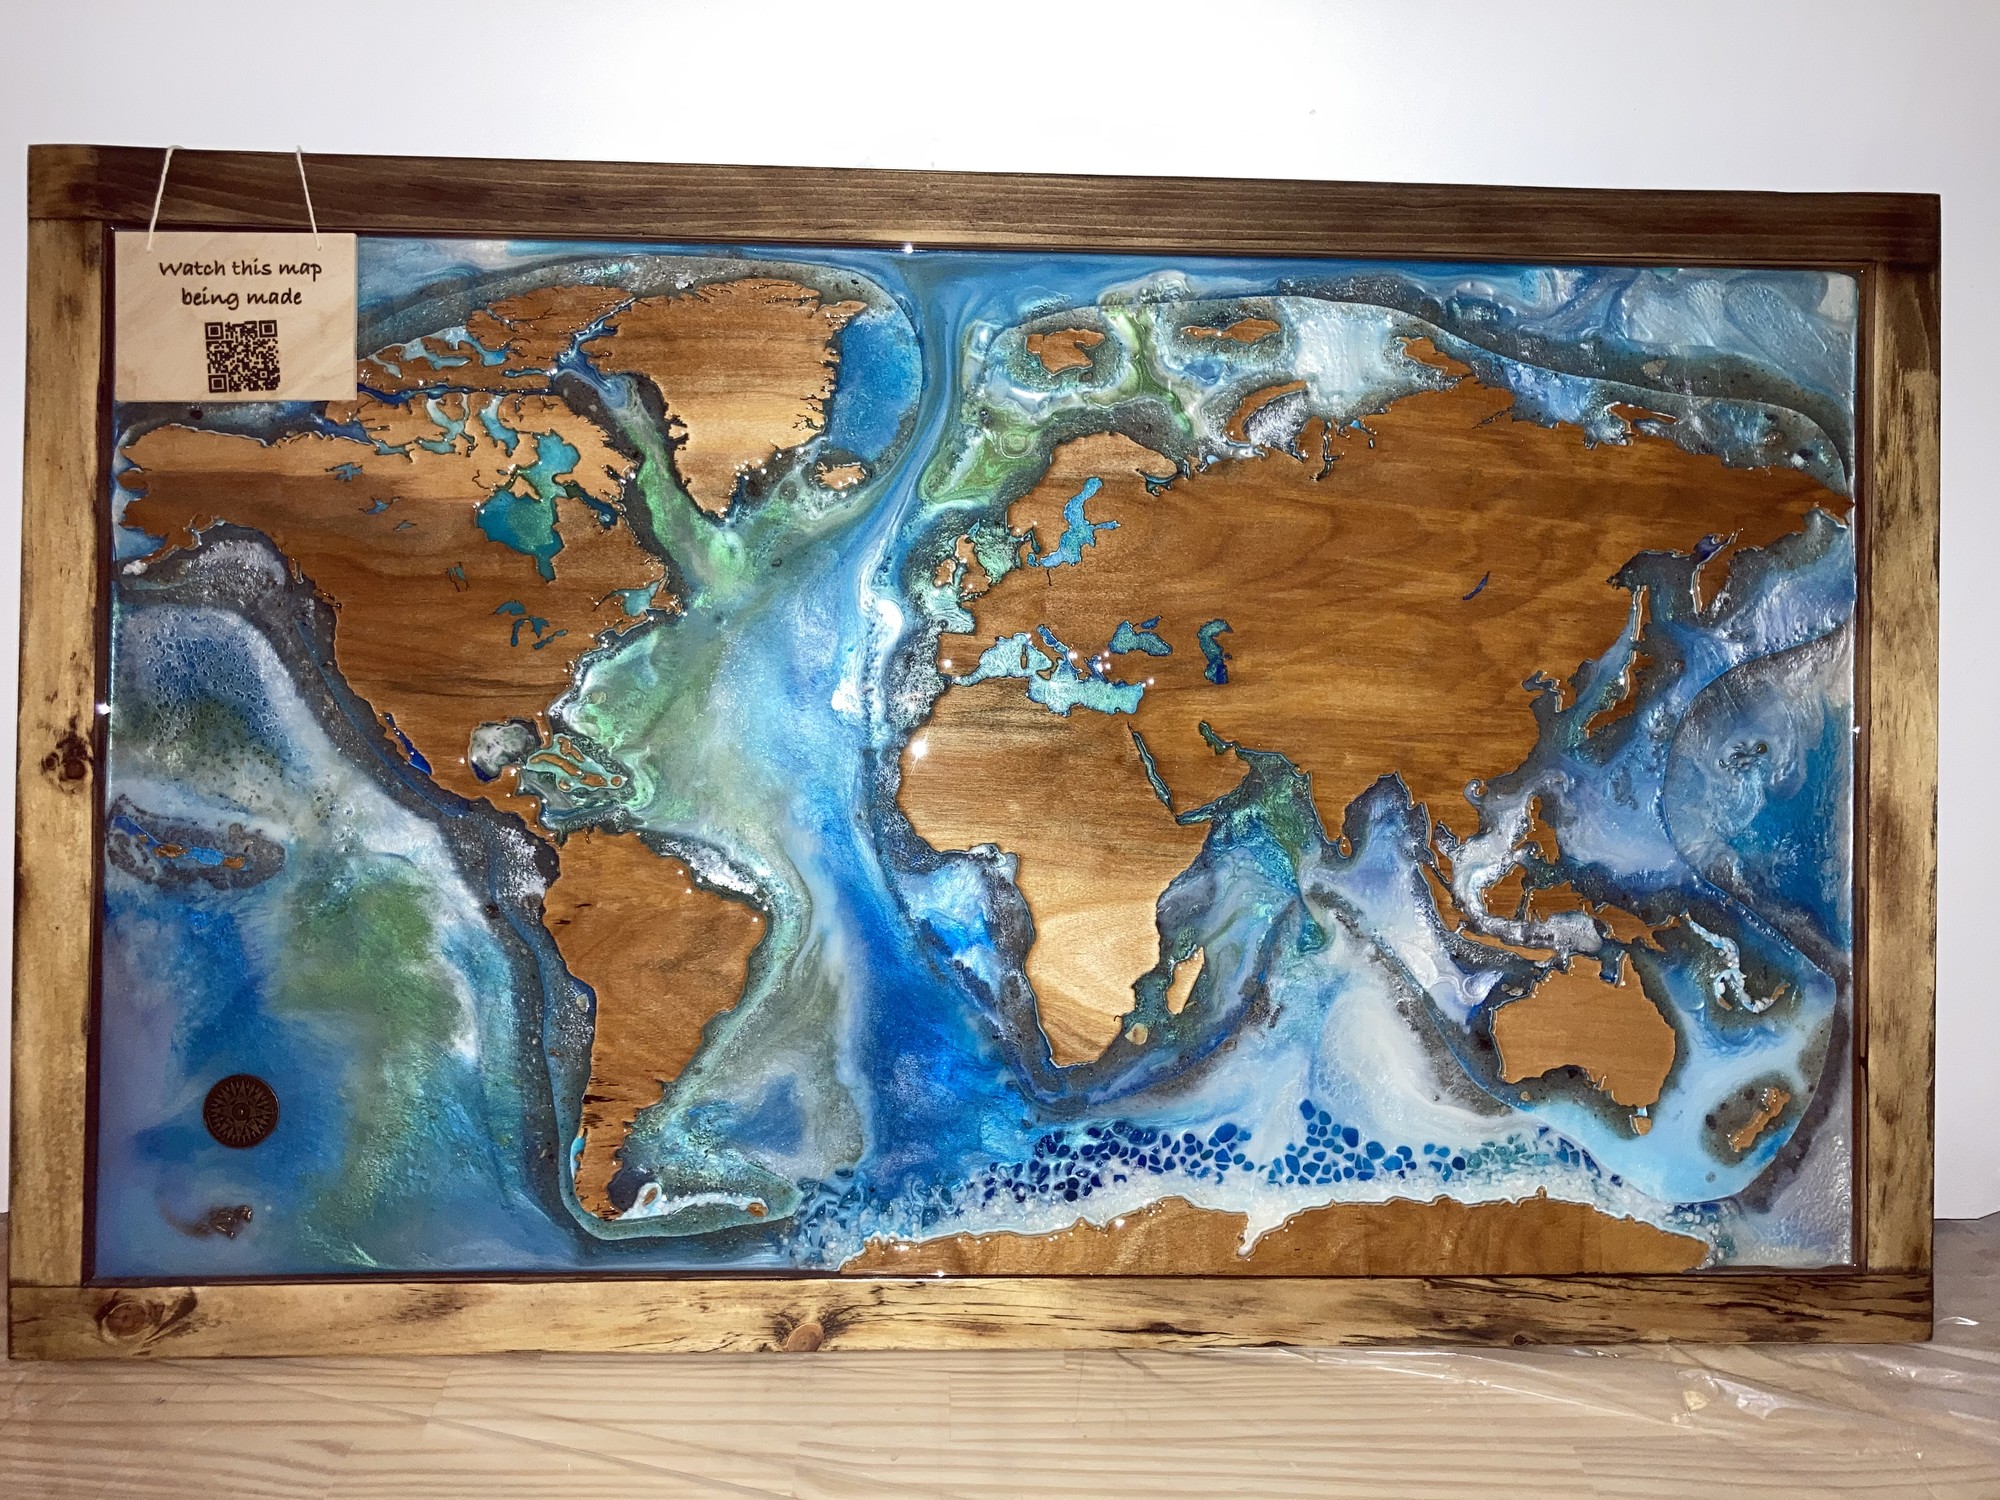 World Map
Size: 40x24 inches

This world map is a great conversation piece and at 24x40 is the perfect size for over a fireplace or in an entry way. This unique piece will make an unforgettable impression on anyone who sees it.

This piece was created with hand-cut reclaimed wood and epoxy resin - no laser cutter or CNC used. Each piece is unique. The frame has marks from the wood's previous life. The map is reclaimed birch. The epoxy
resin used is non-toxic, food-safe and no-VOC.

When choosing products for your home that contain resin please know what you're buying. The epoxy resin we use is much more expensive because it is non-toxic. It is formulated using the highest quality materials and therefore produces no VOCs or fumes. It is a clean
system, meaning there are no solvents or non-reactive
diluents - everything in it reacts so nothing is free to become airborne and cause health issues. Our resin is so safe it can be safely used as a food contact surface.